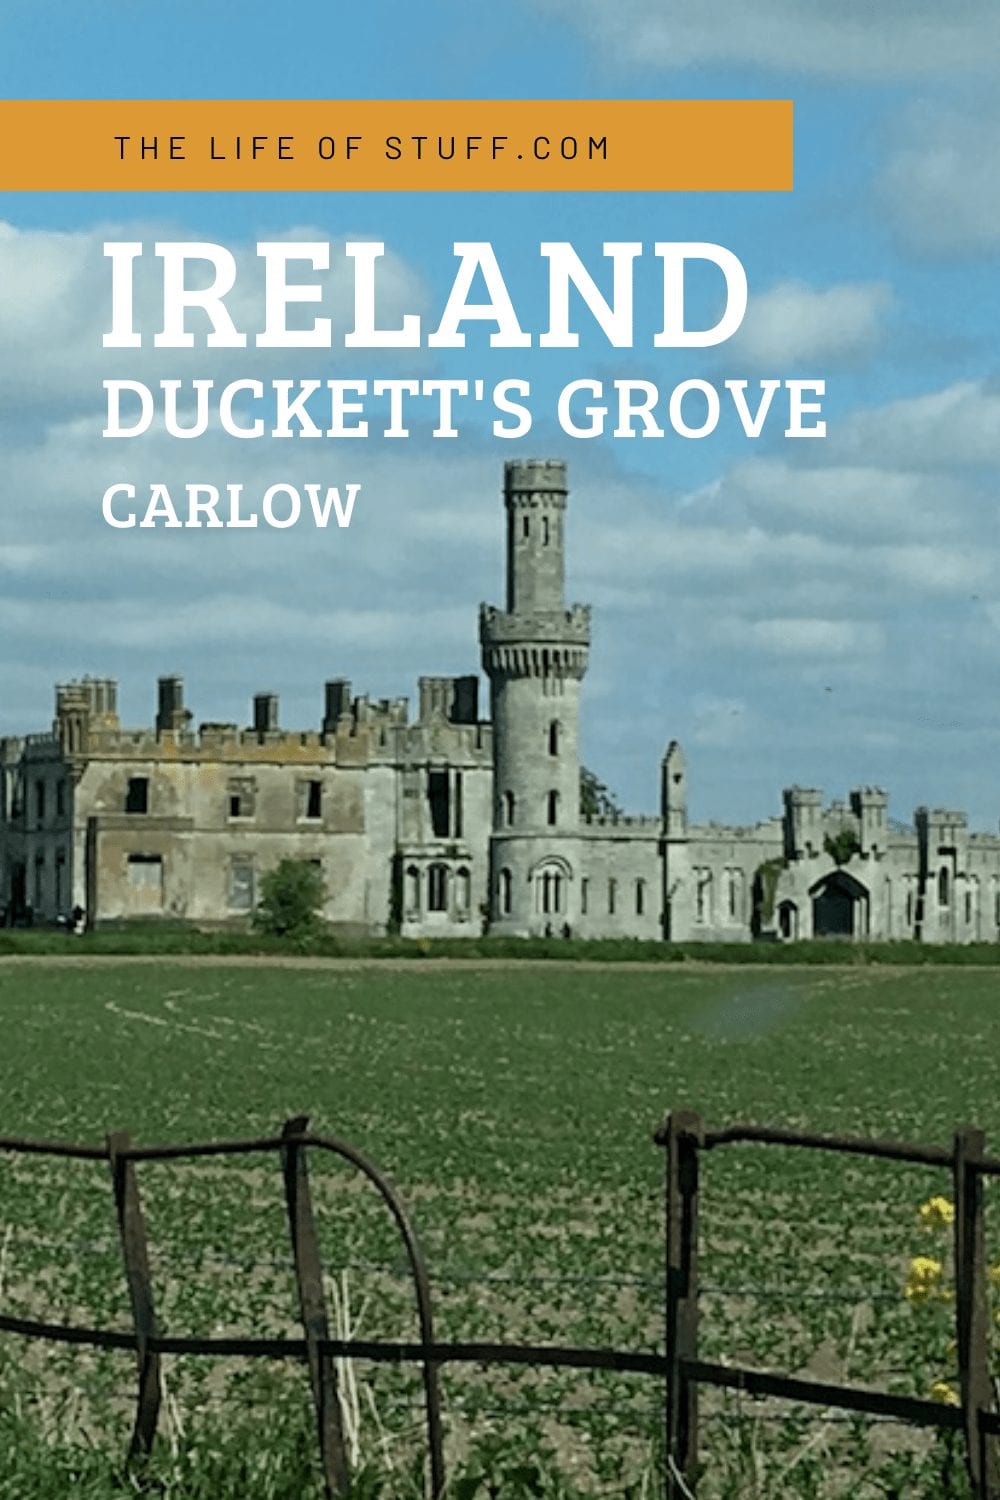 The Life of Stuff - Duckett's Grove, Keenstown, Carlow in Photos